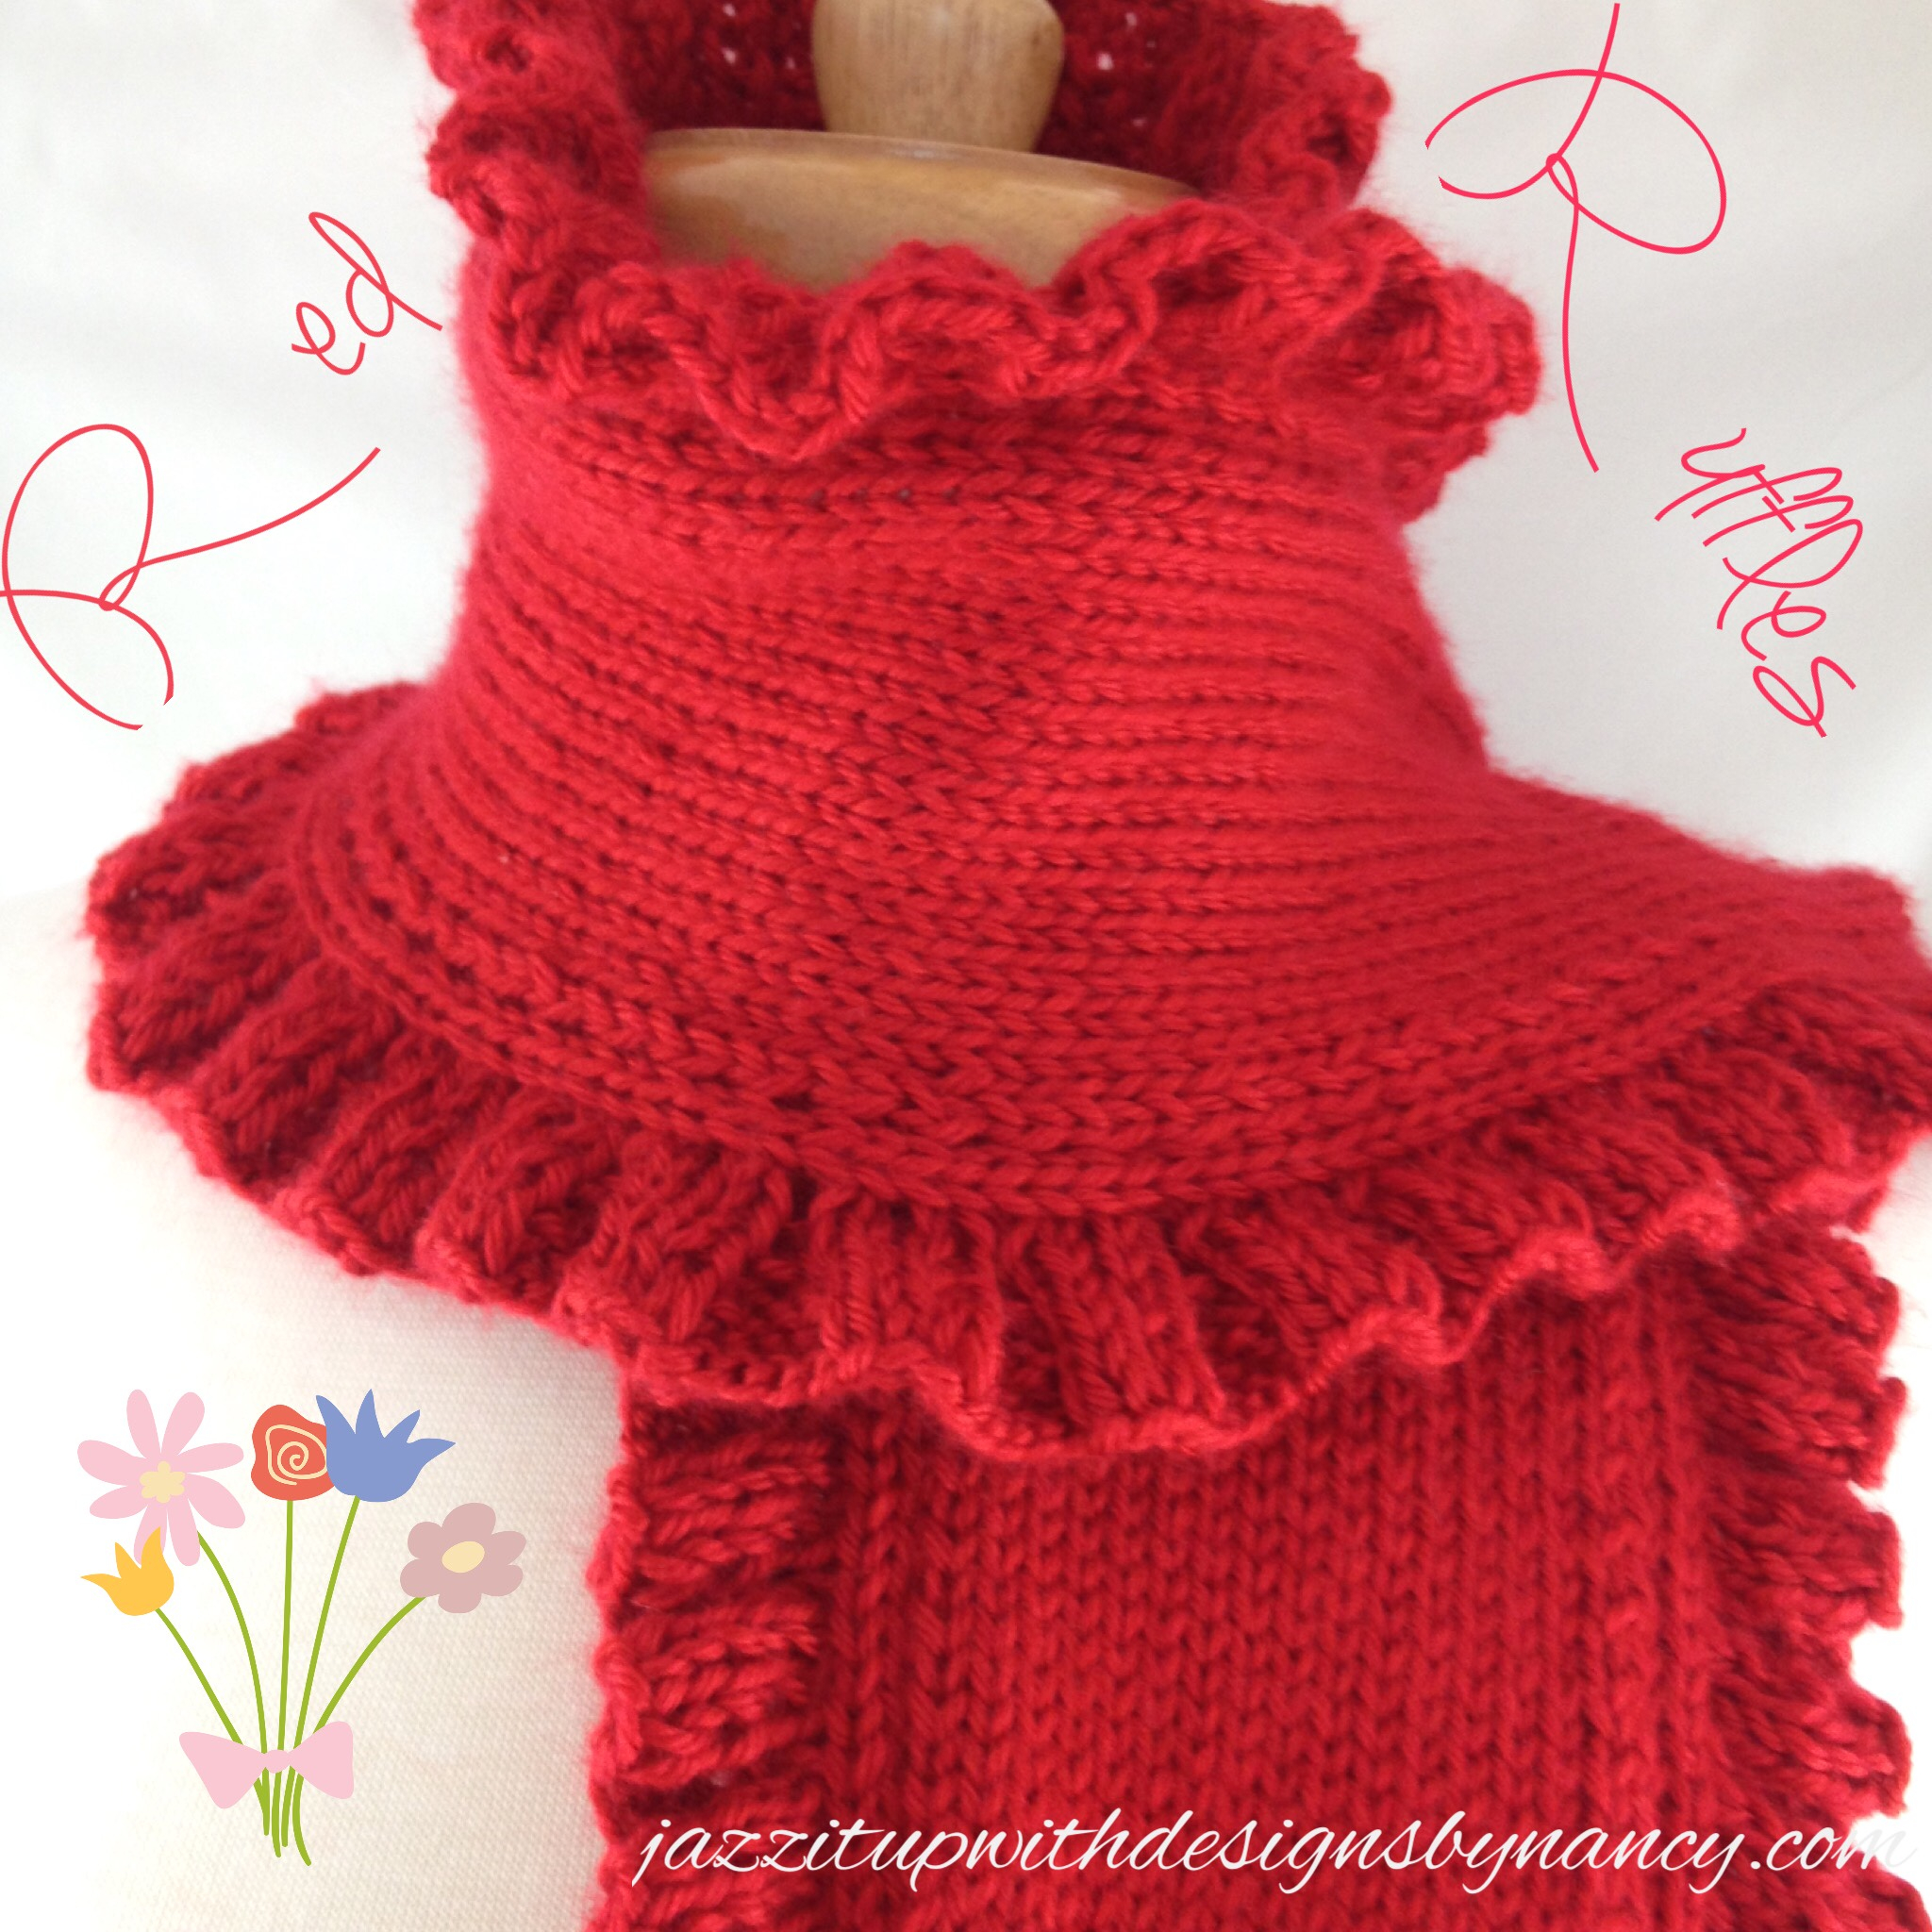 Knitted Ruffle Scarf Pattern Scarf Hand Knit Ruffle Ladies Elegant Red Victorian Style Neck Warmer